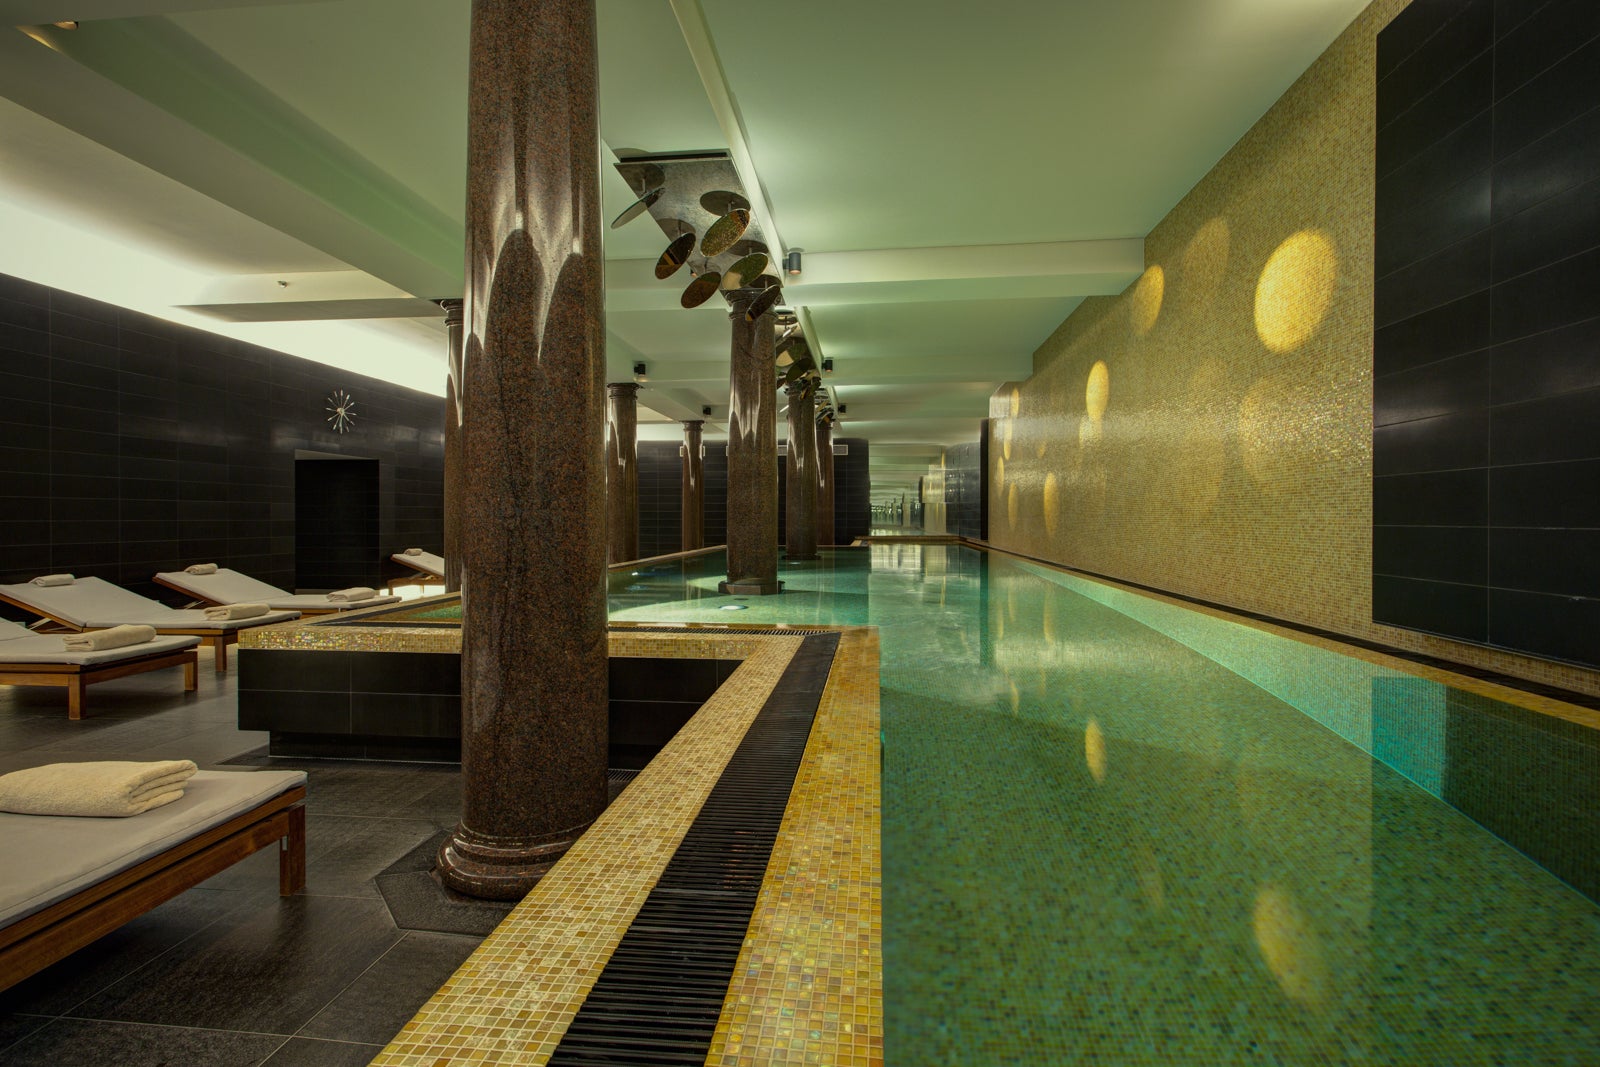 After pounding pavements, relax in the extensive spa at Hotel de Rome